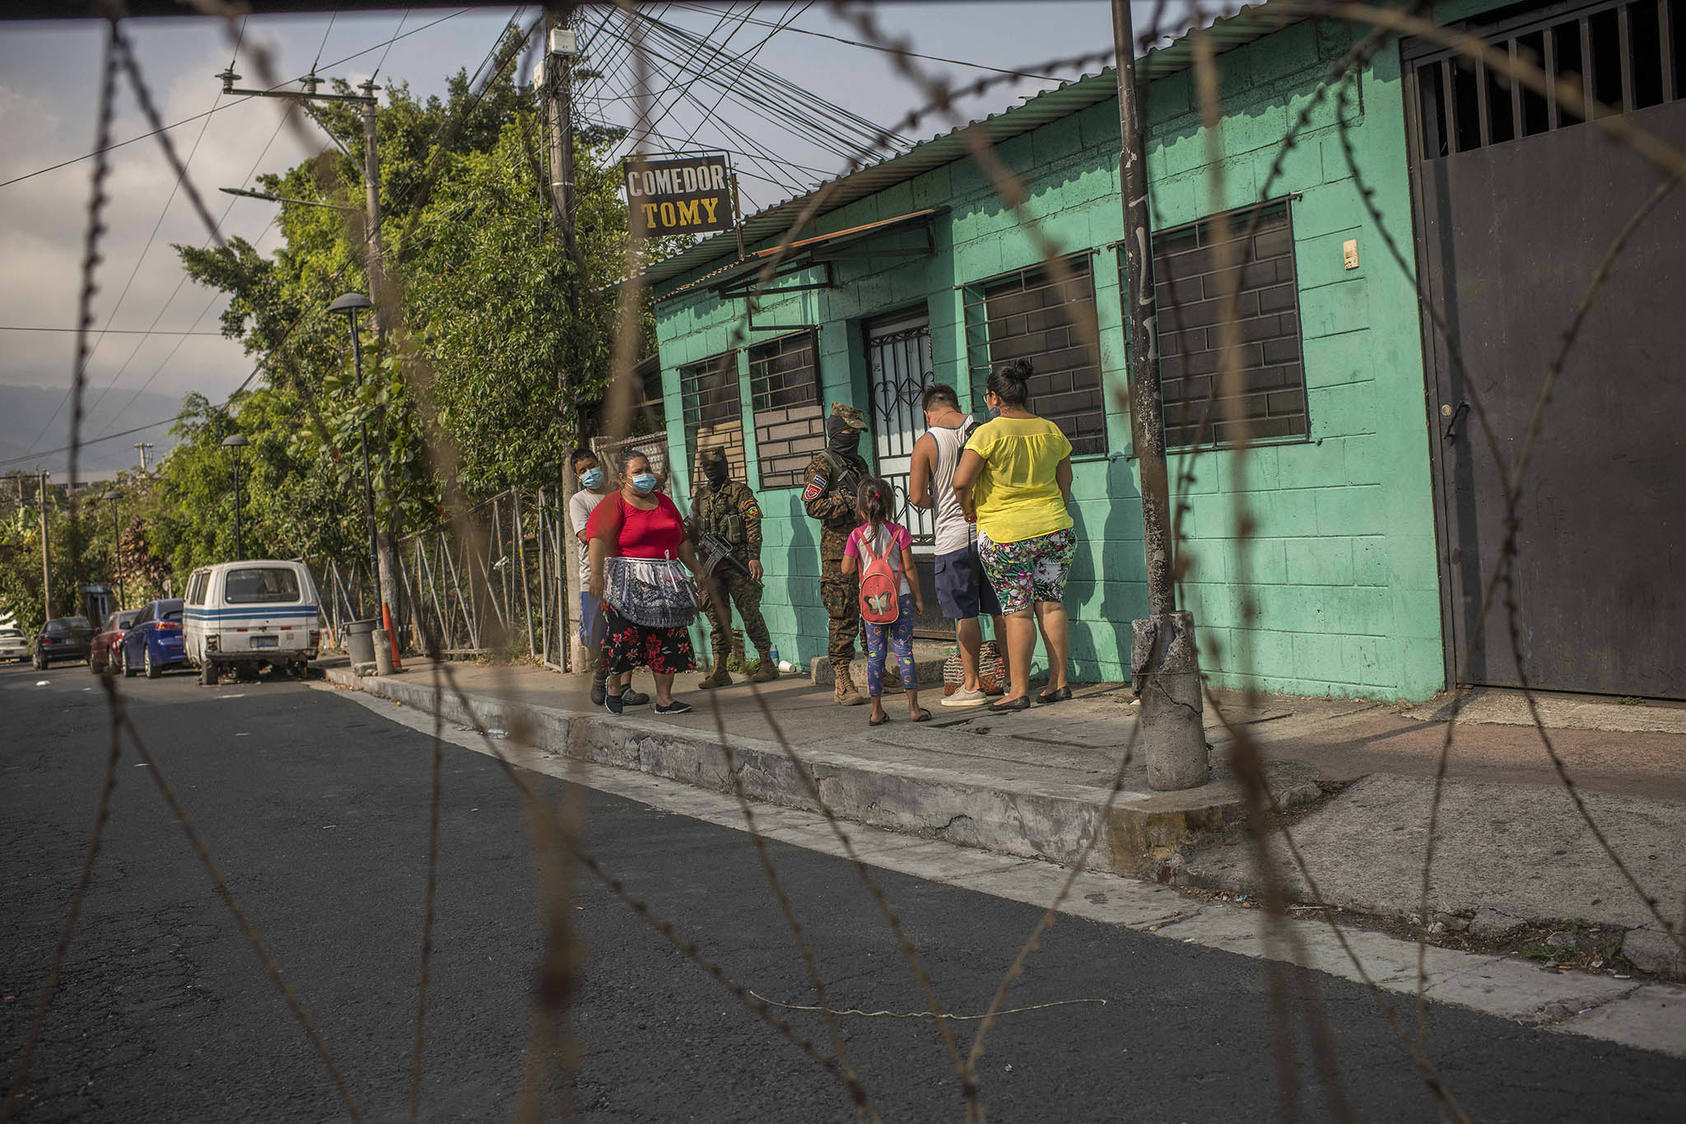 A military checkpoint in San Salvador, El Salvador, April 14, 2022. President Nayib Bukele’s popularity has risen amid a crackdown on gang violence that has resulted in the suspension key civil liberties. (Daniele Volpe/The New York Times)